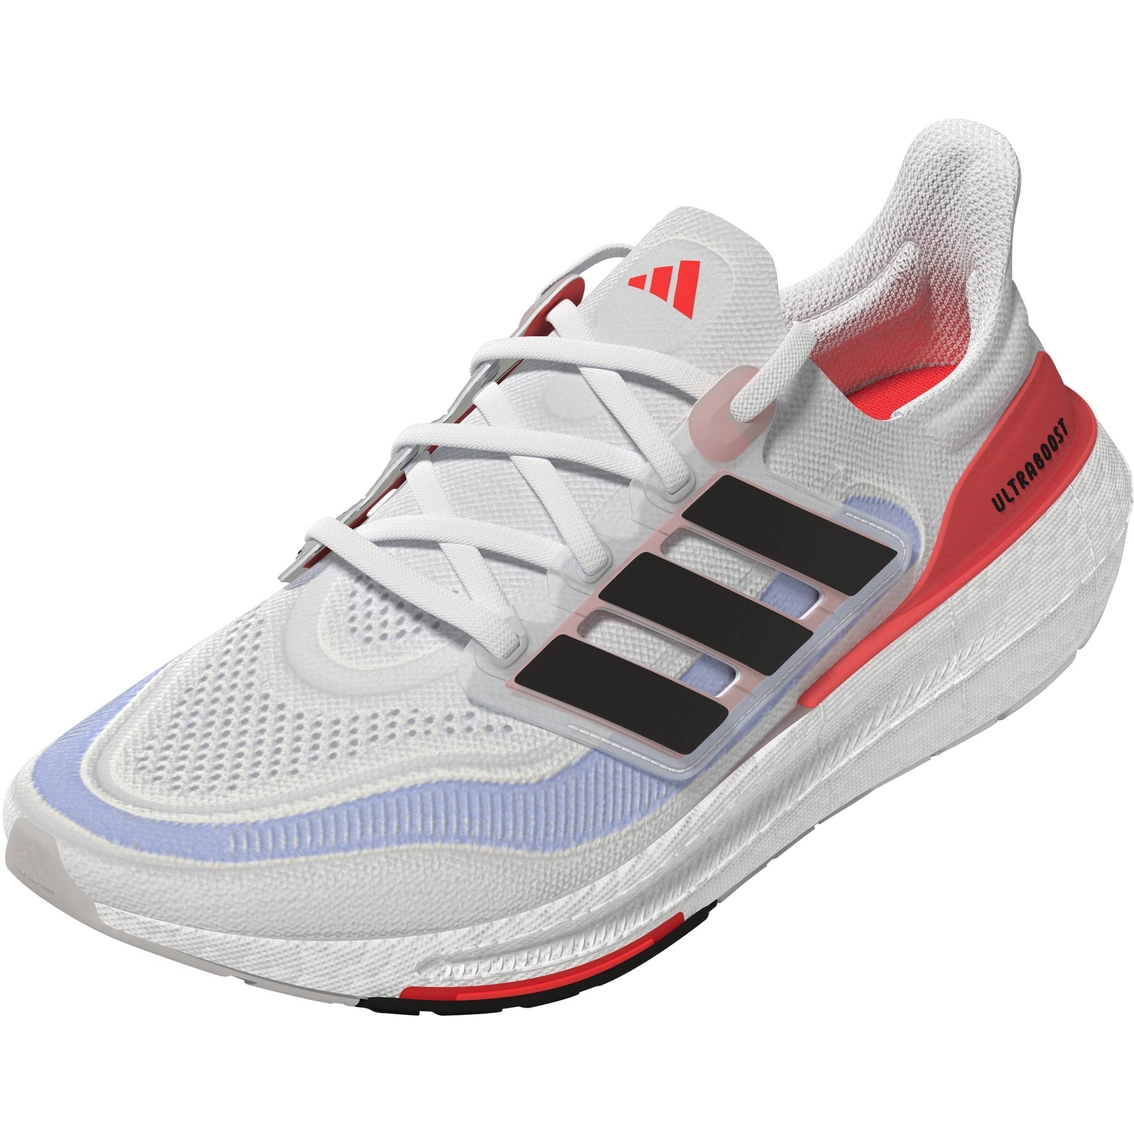 Adidas Men's Ultraboost Running Shoes - Image 1 of 3